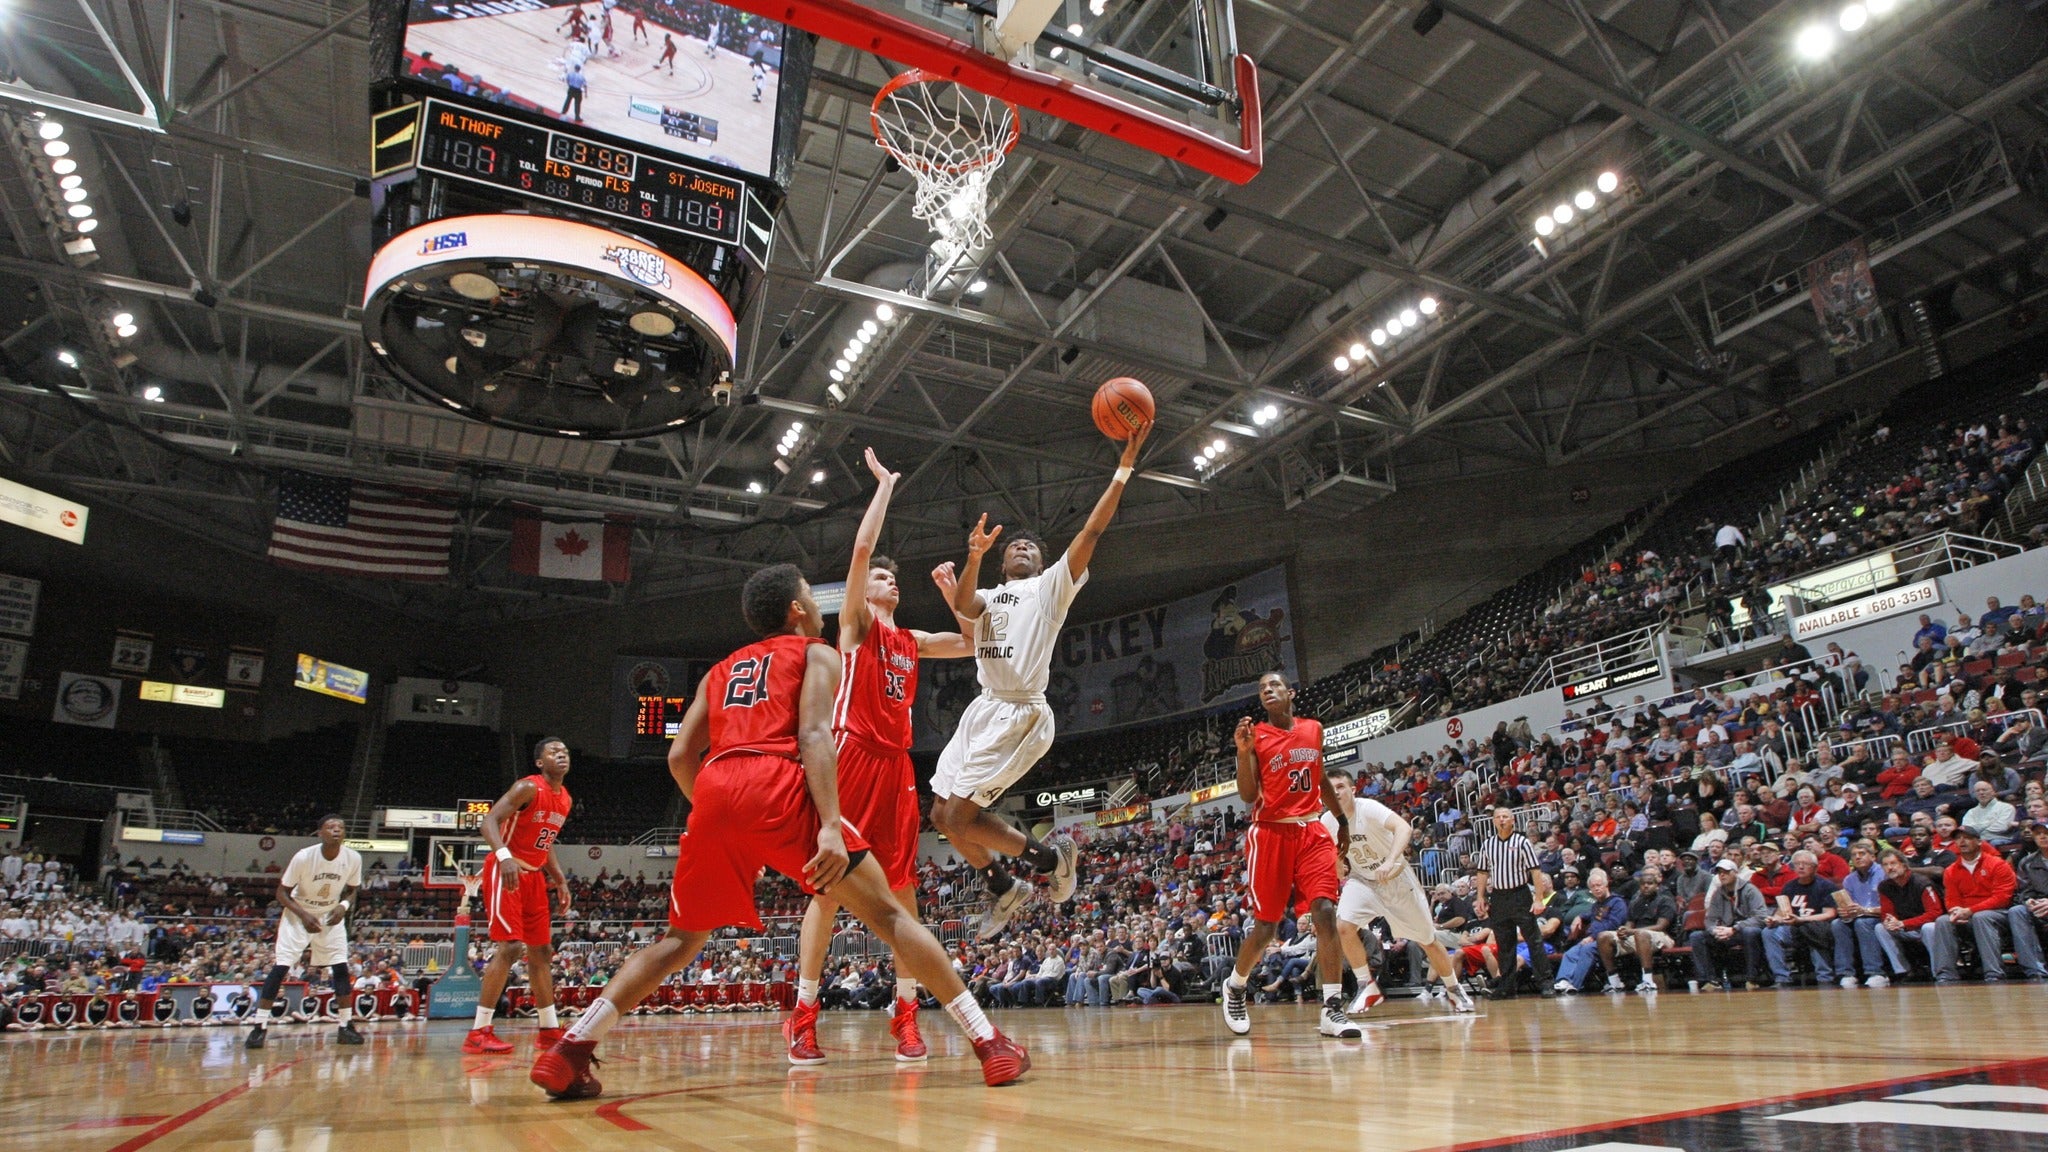 IHSA Basketball Championships Tickets | Single Game Tickets & Schedule